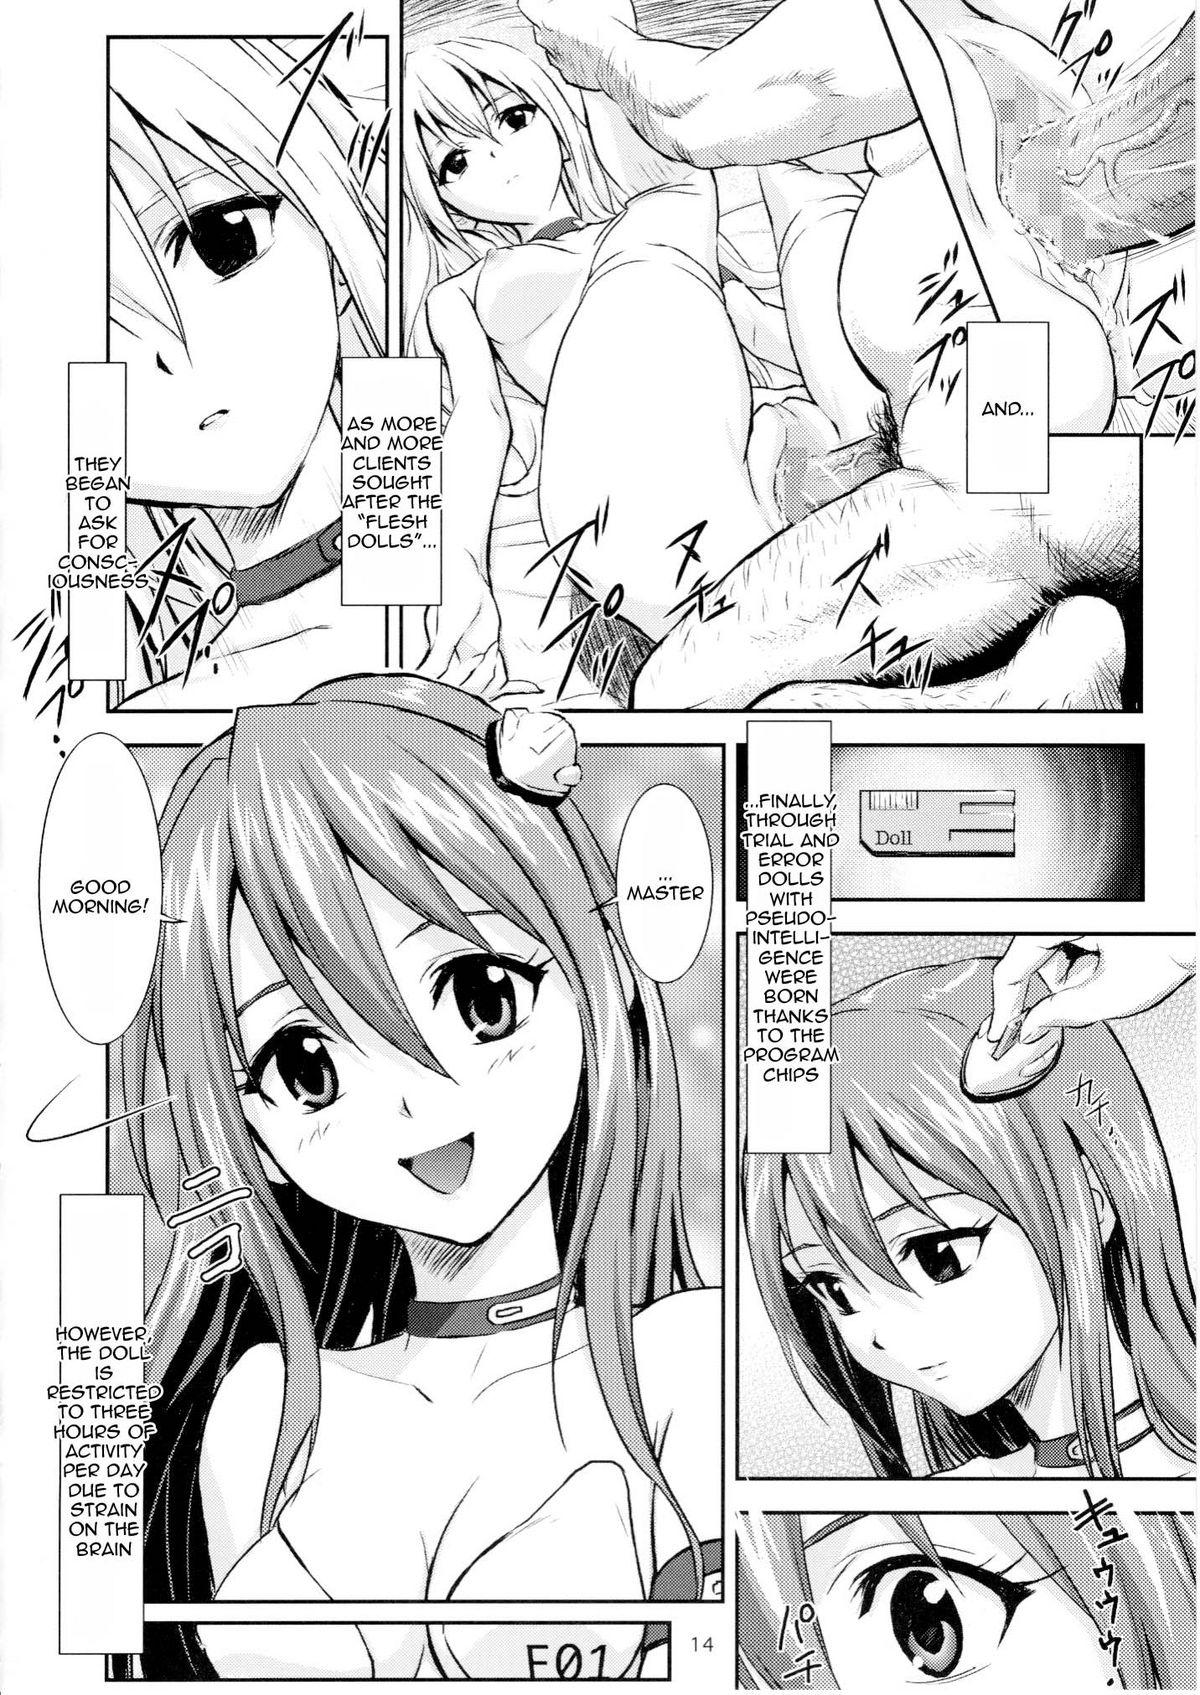 Gay Studs Doll House Vol. 1 - Neon genesis evangelion Rough Fucking - Page 13